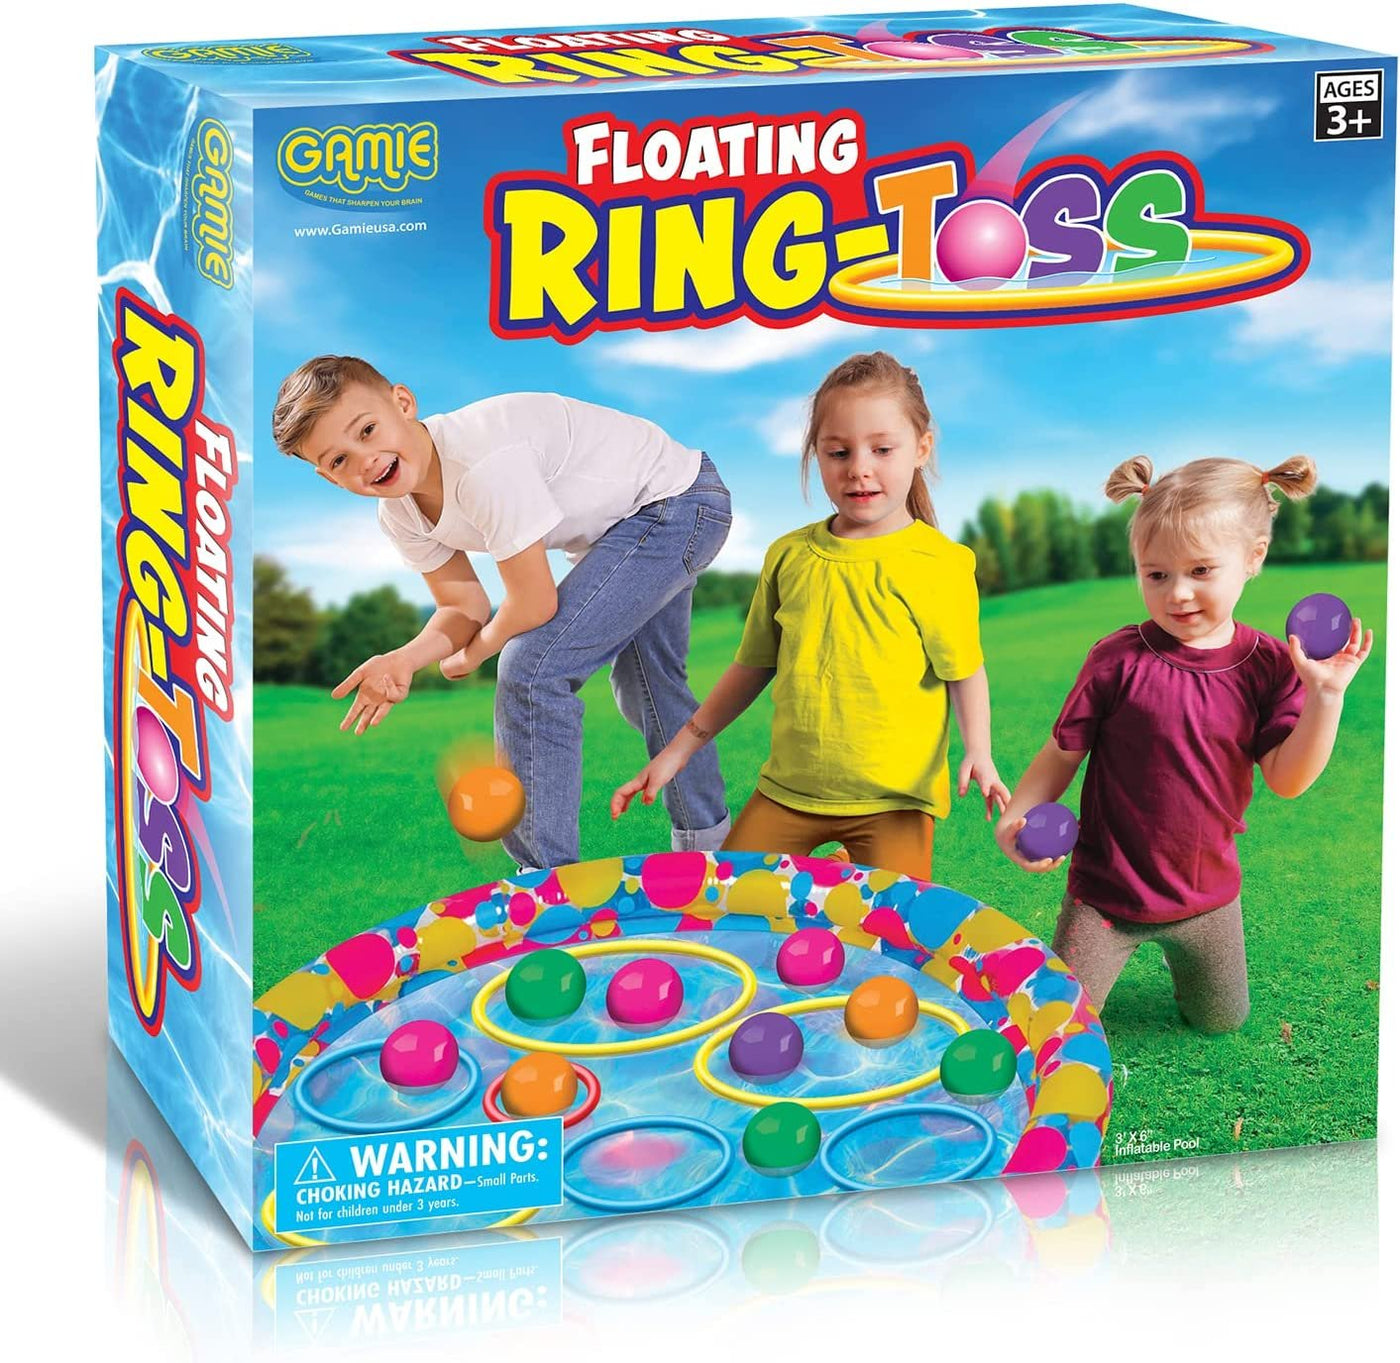 Human Ring Toss Game - Summer Outdoor Game for Kids & Adults